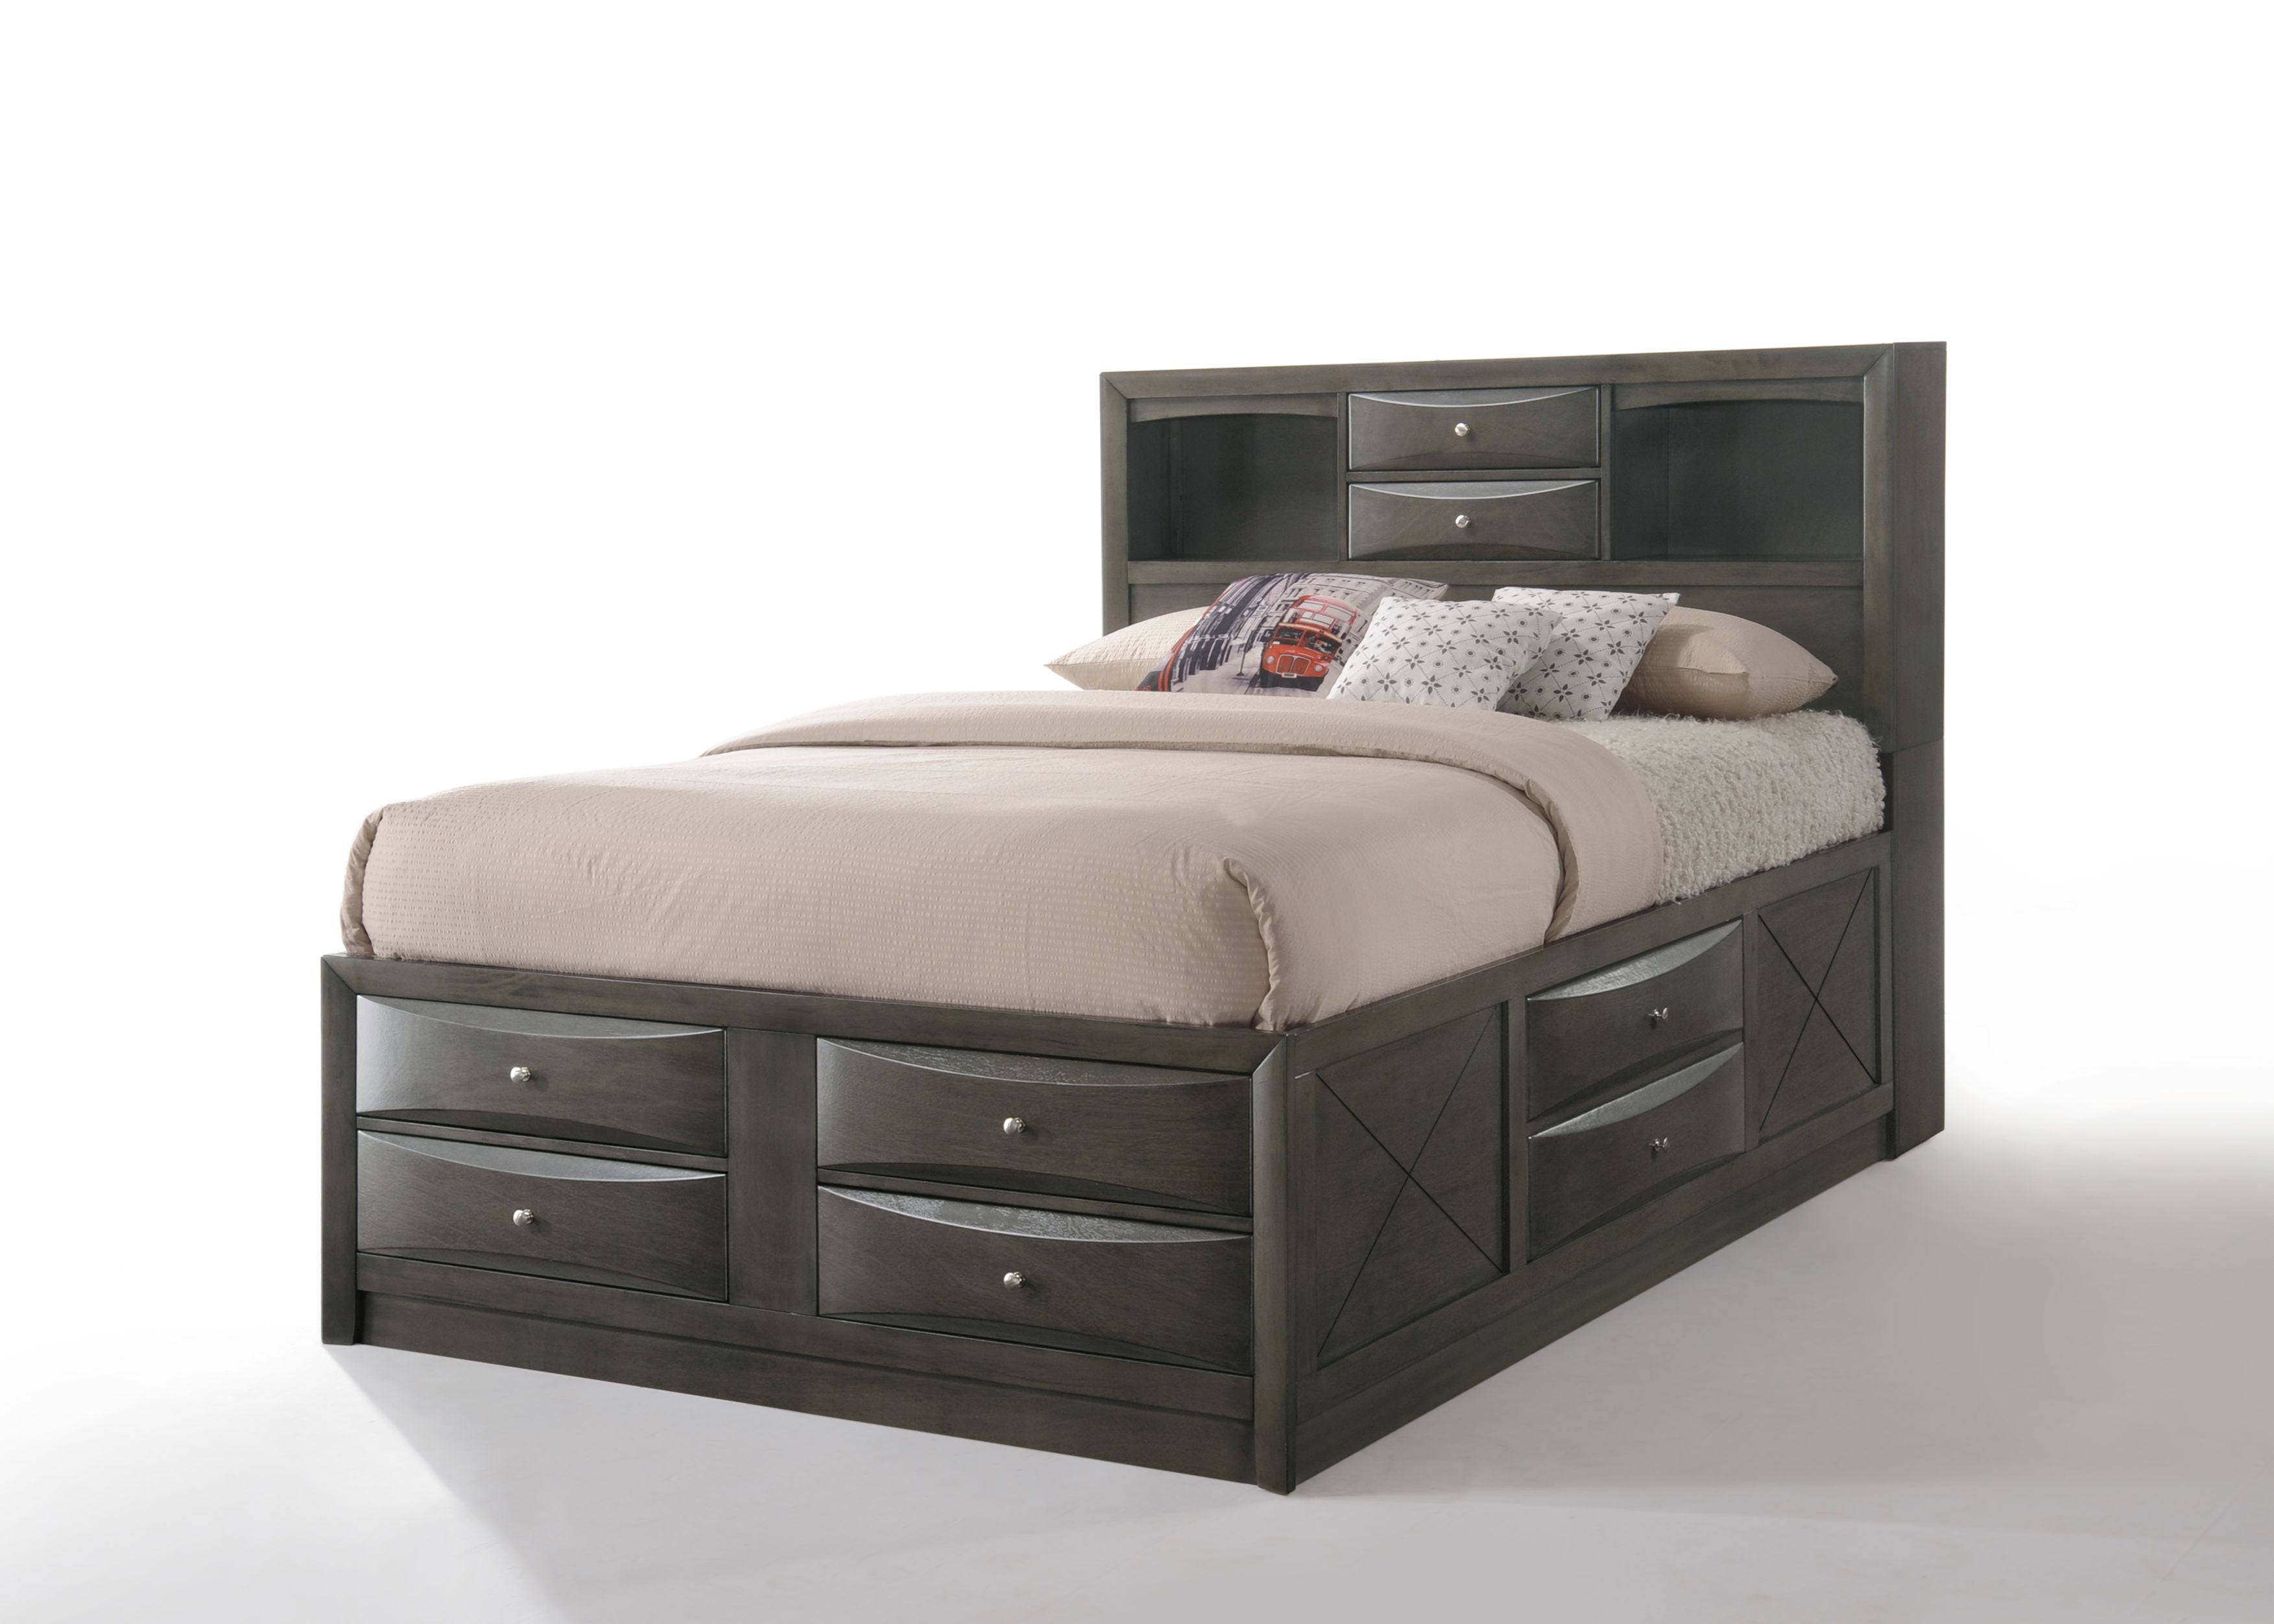 Picture of ACME 22710F 4 Piece Ireland Full Size Bed with Storage - Gray Oak - 56 x 86 x 57 in.